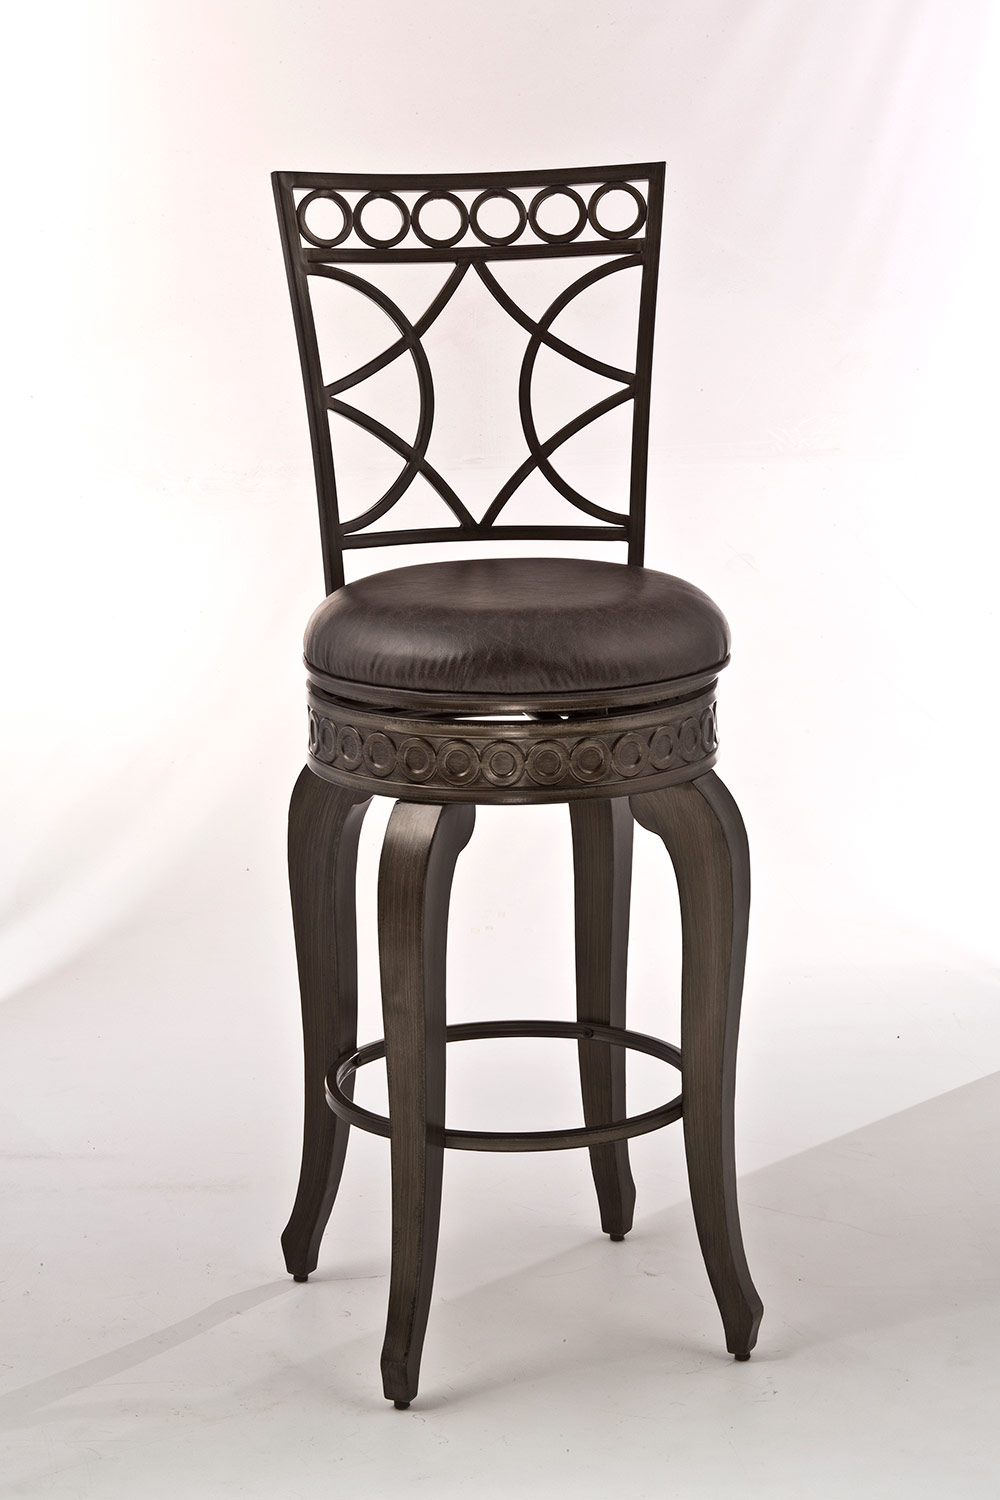 Hillsdale Webster Swivel Counter Stool - Antique Brushed Pewter - Charcoal Faux Leather